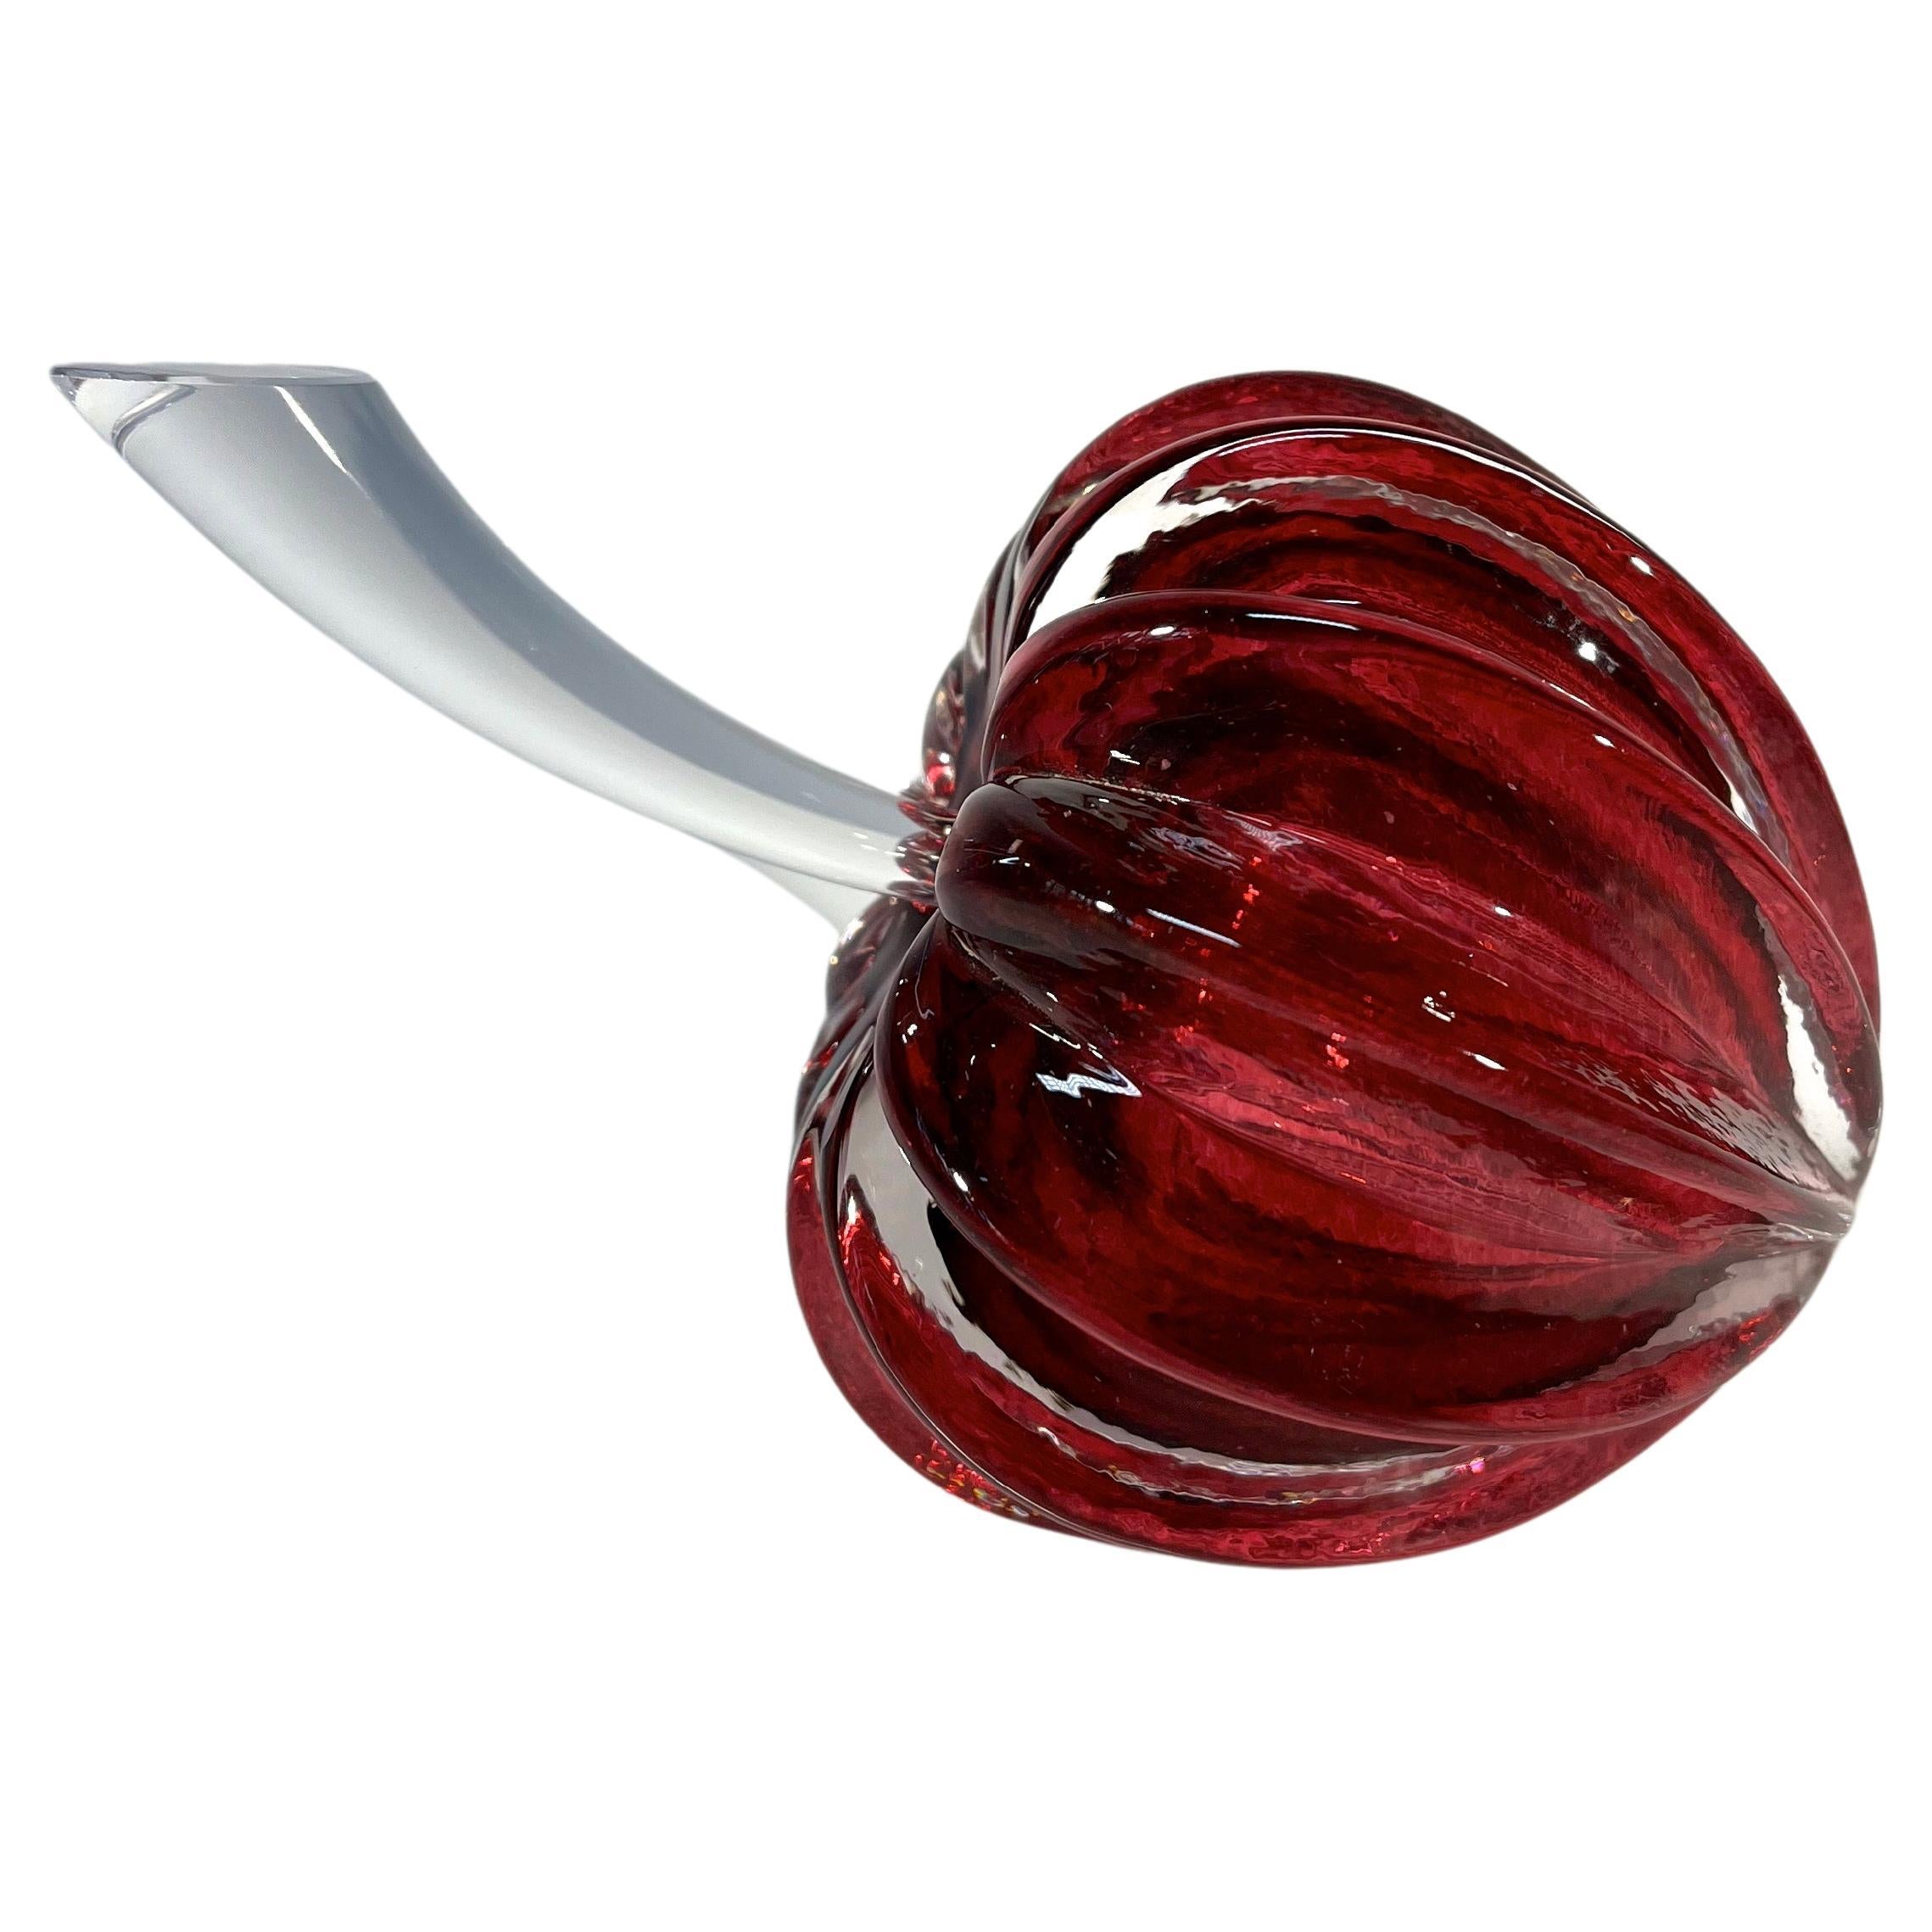 Delicious berry red 'Stemmed Fruit' crystal perfume bottle with a clear crystal stopper
A desirable piece of contemporary counter-balanced glass art
Created by Ian Hankey for Teign Valley Glass of Devon, England
Signed IH to the base
Circa